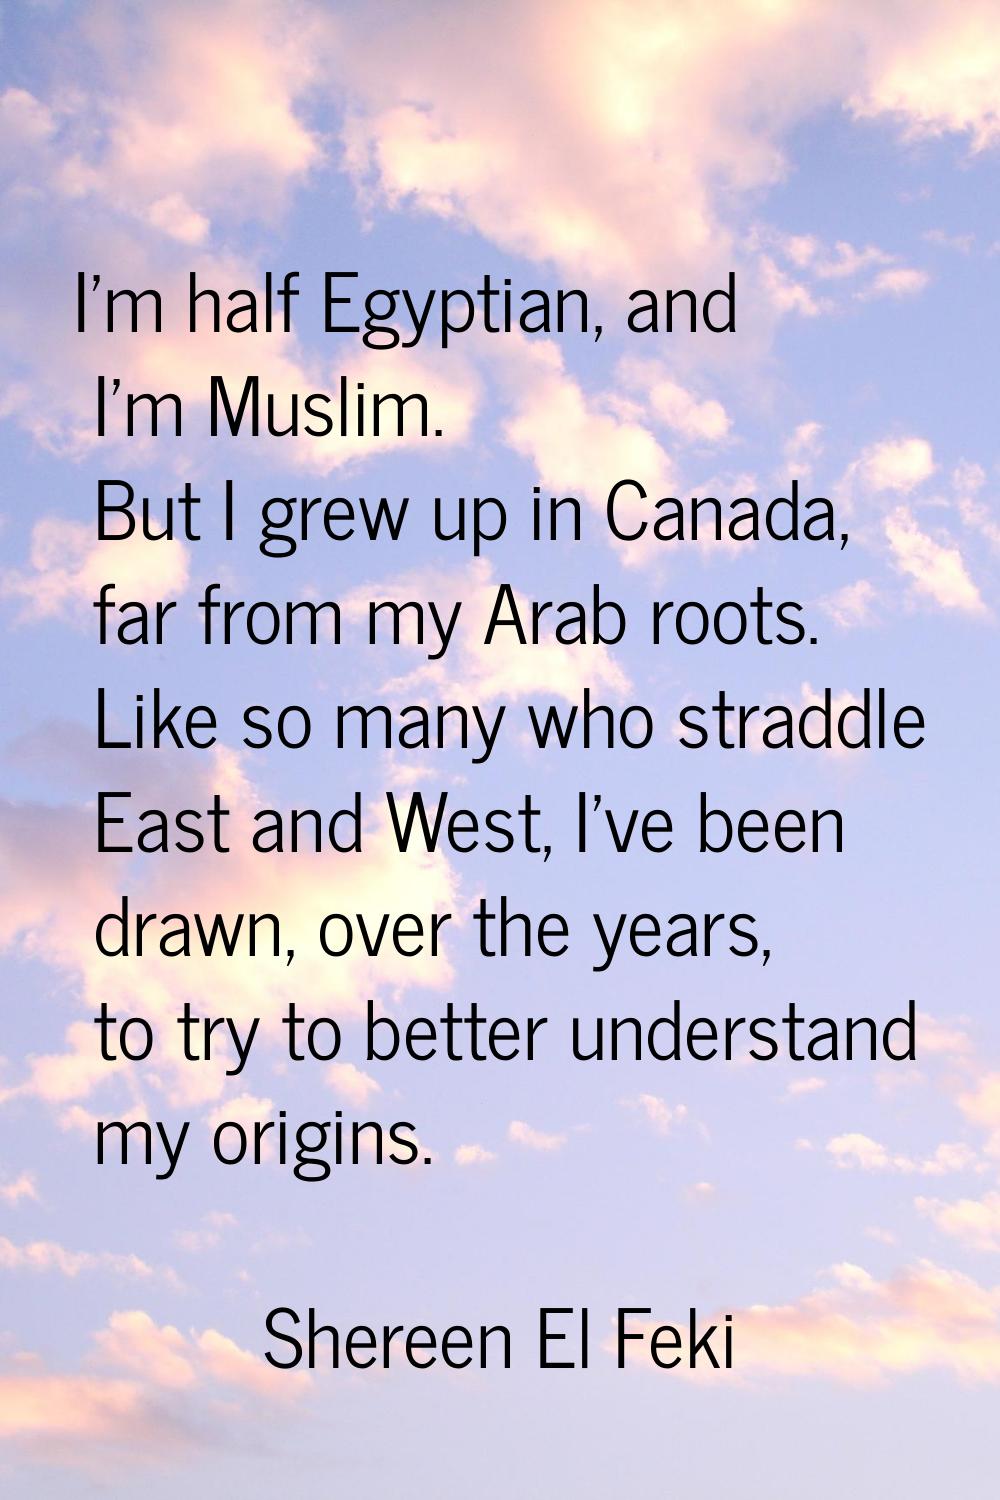 I'm half Egyptian, and I'm Muslim. But I grew up in Canada, far from my Arab roots. Like so many wh